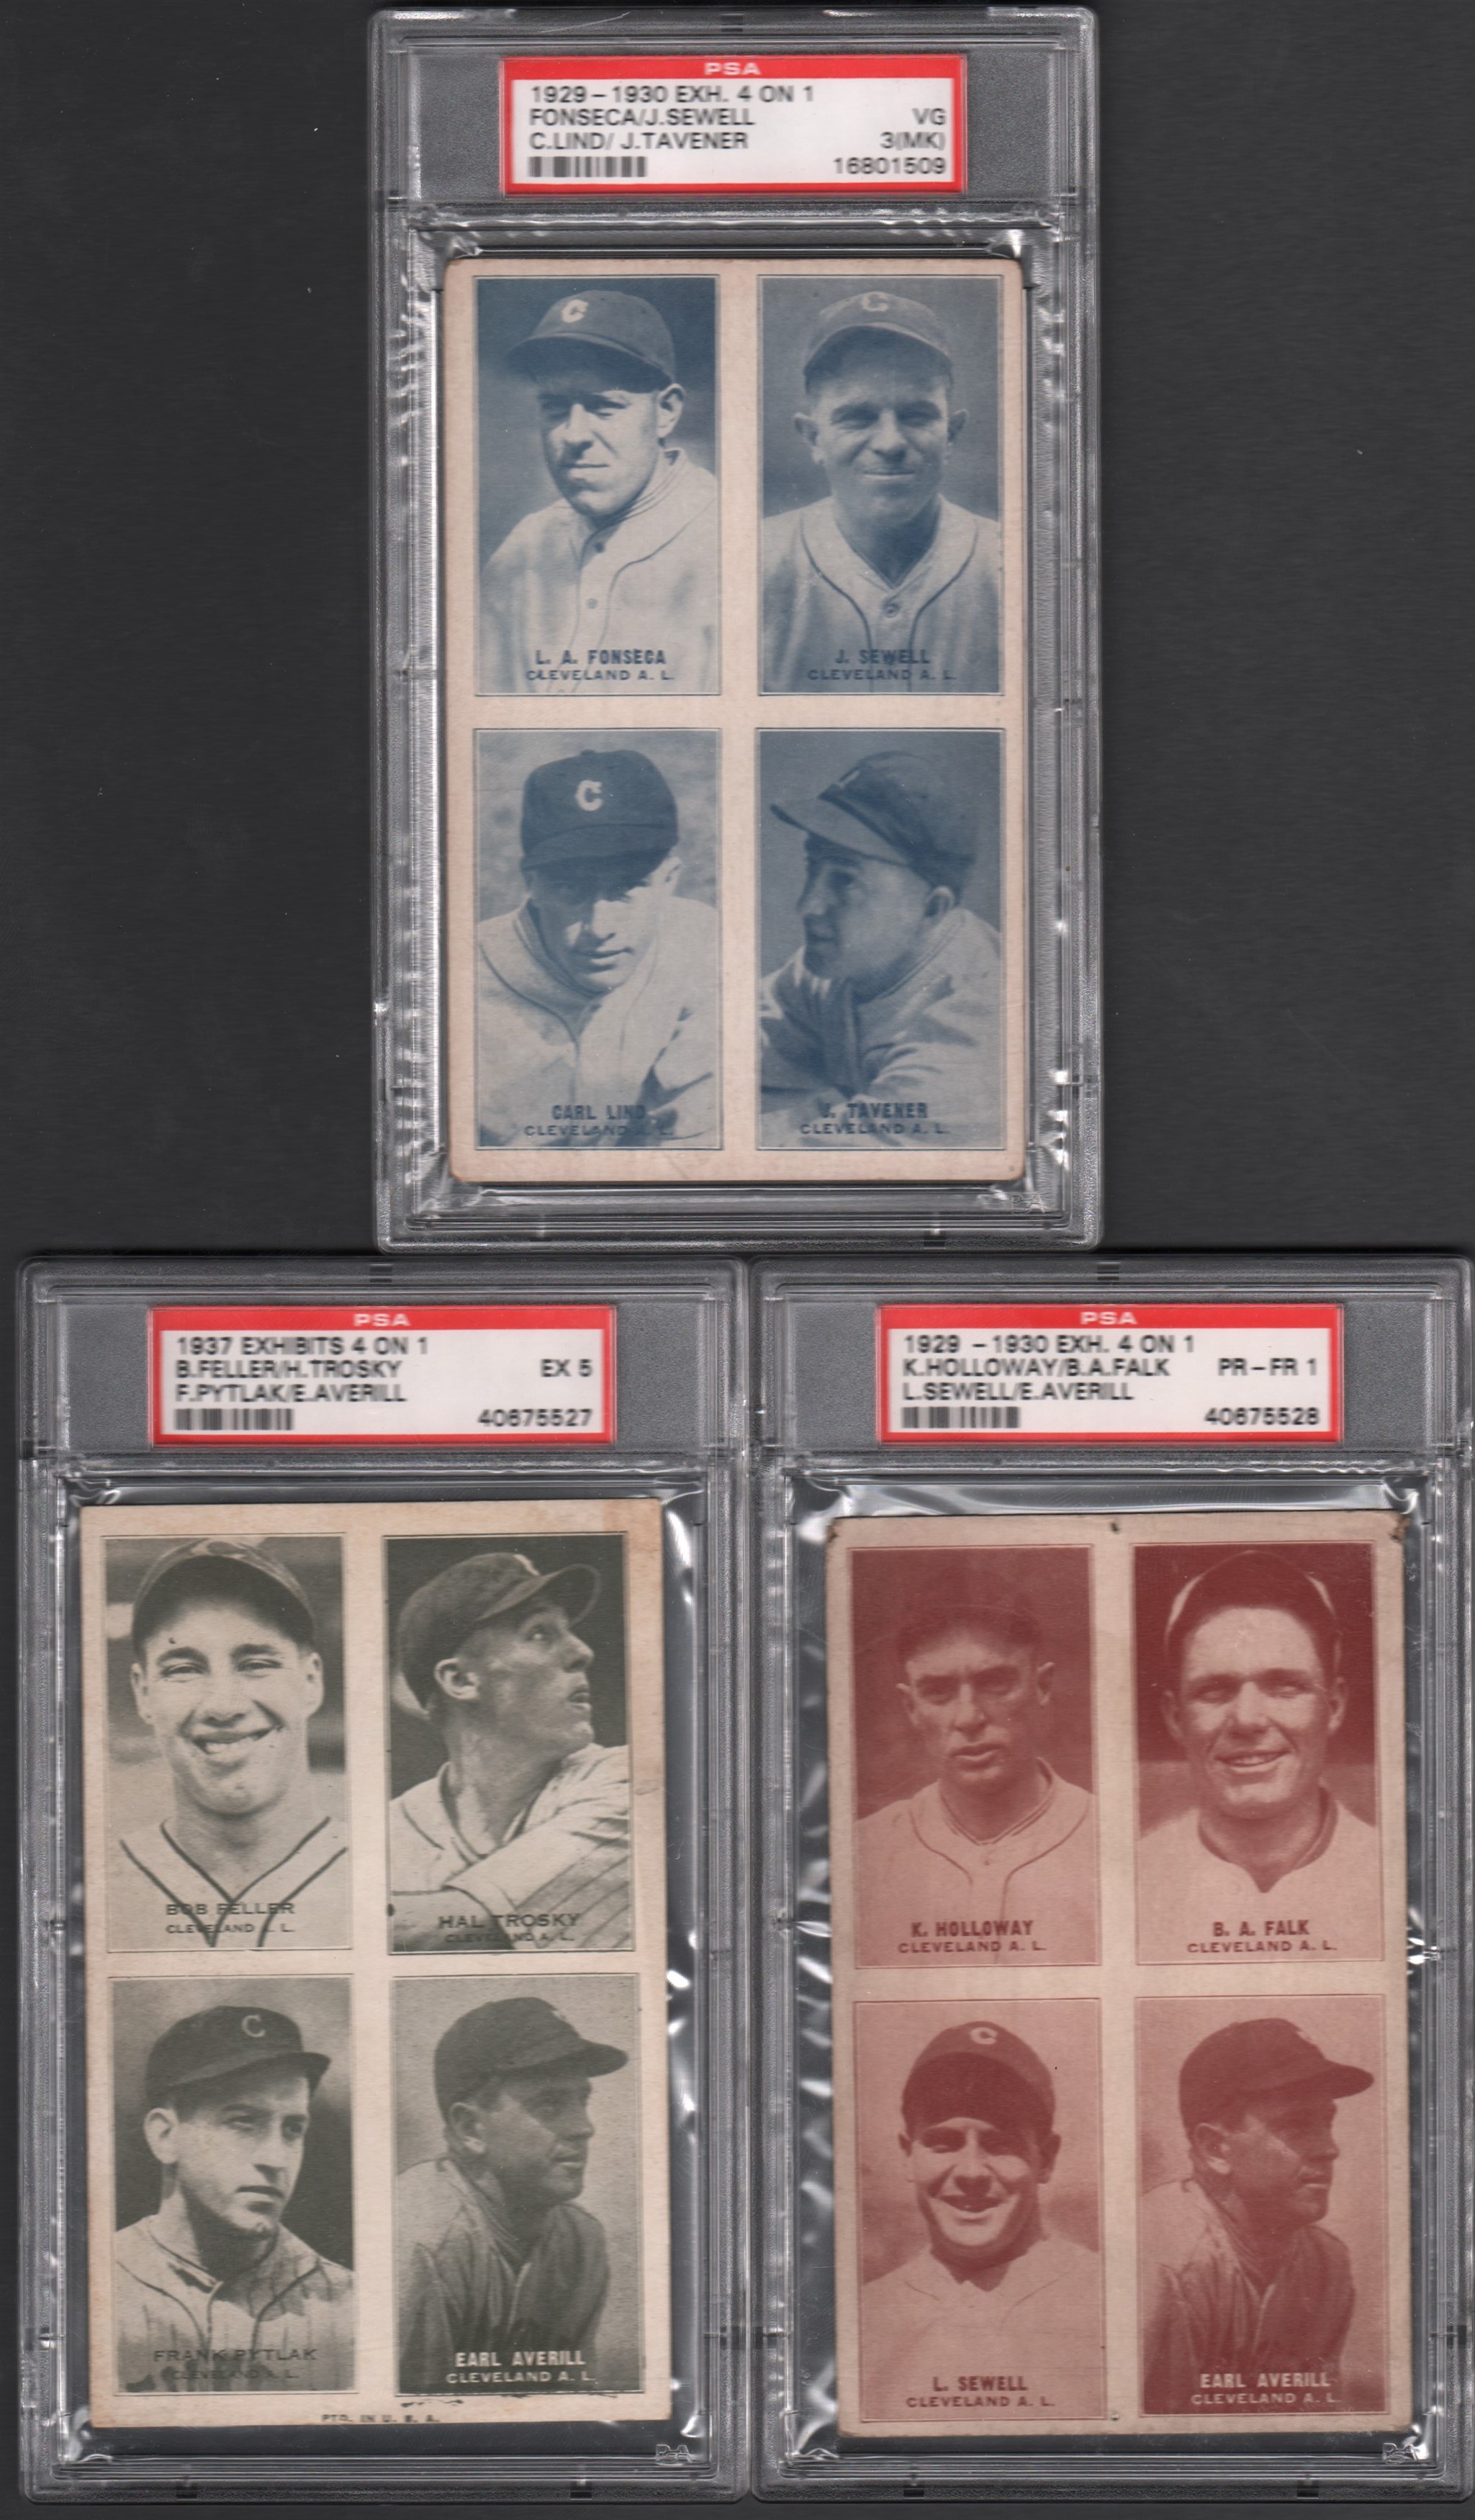 Baseball and Trading Cards - 1929-30 Exhibits 4-on-1 Collection with (3) PSA Graded (19 cards total)